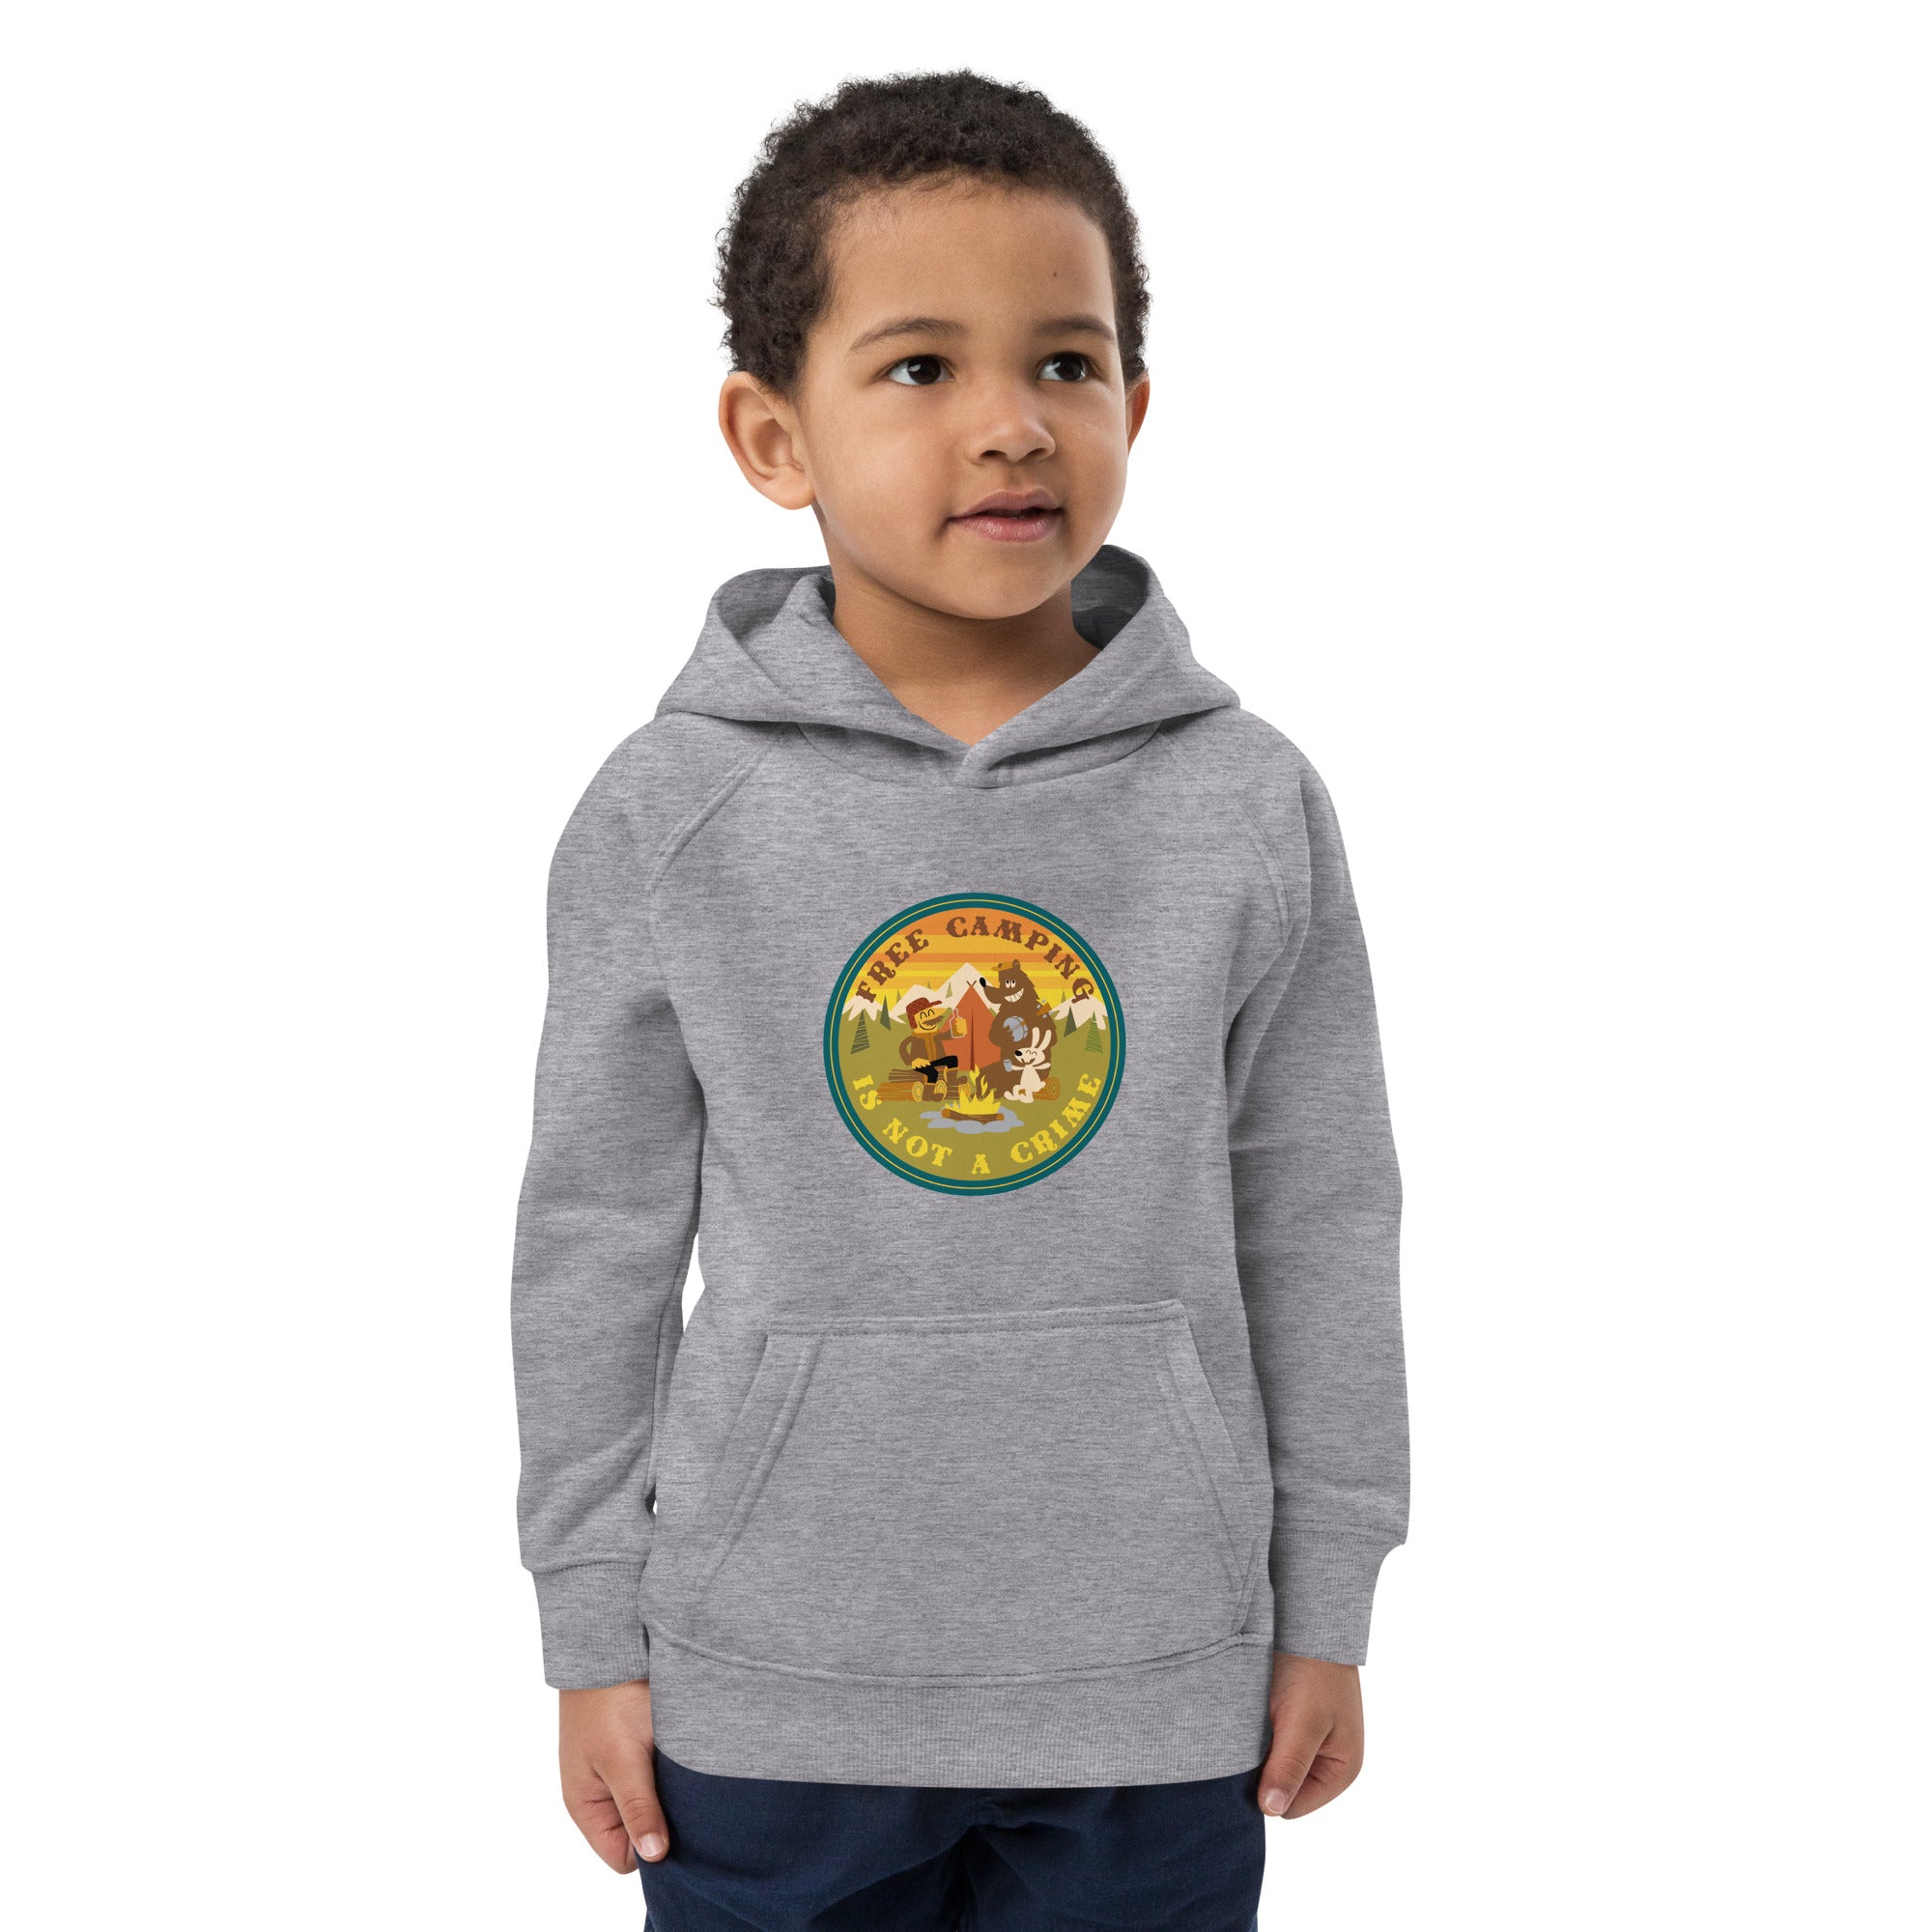 Kids eco hoodie Free Camping is not a Crime